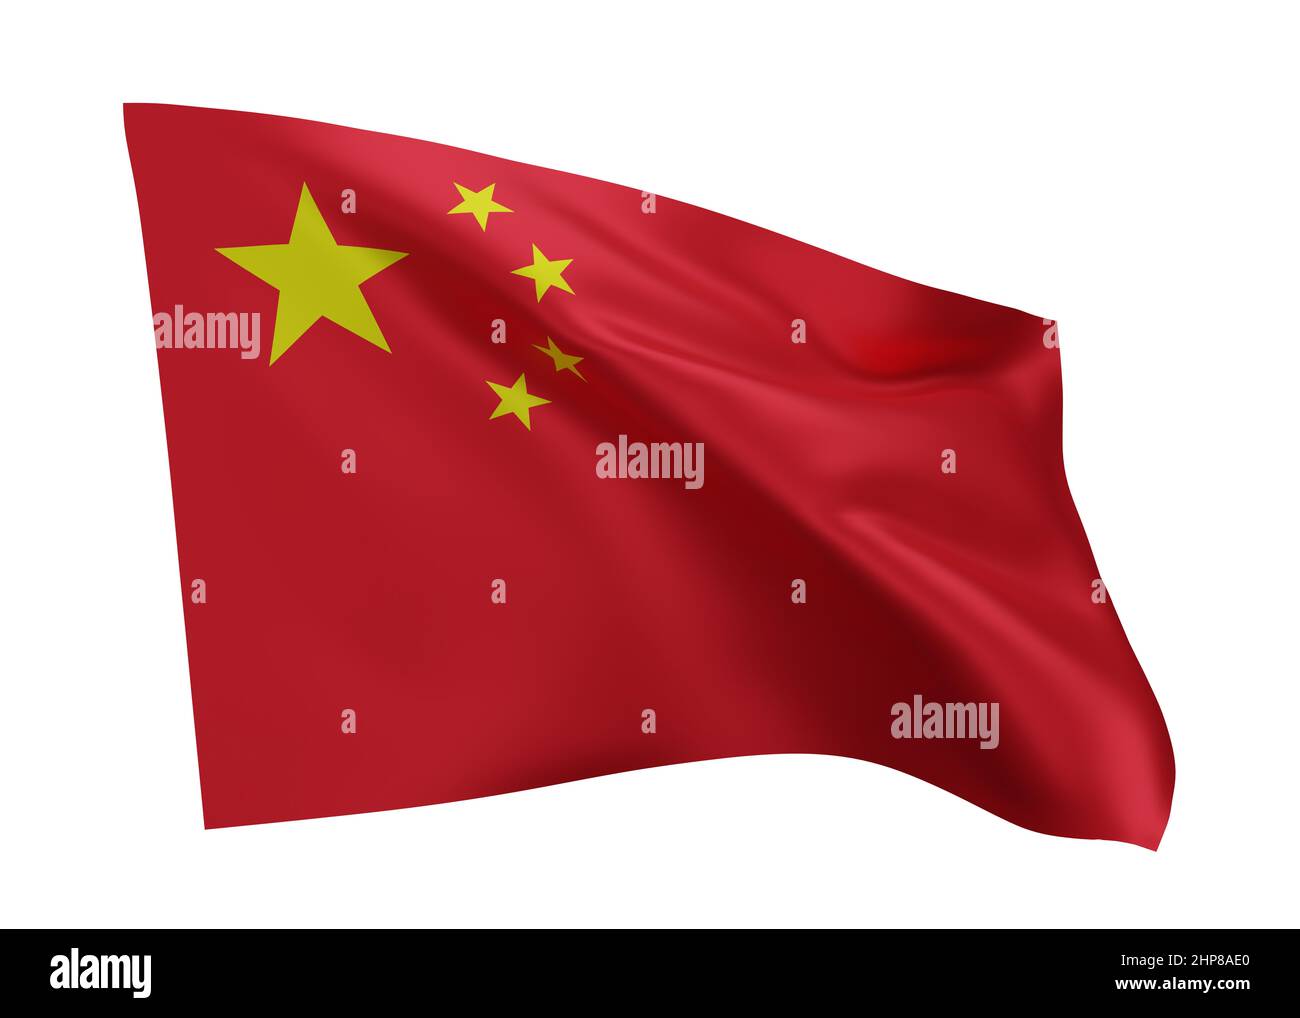 3d illustration flag of Republic of China. China high resolution flag isolated against white background. 3d rendering Stock Photo